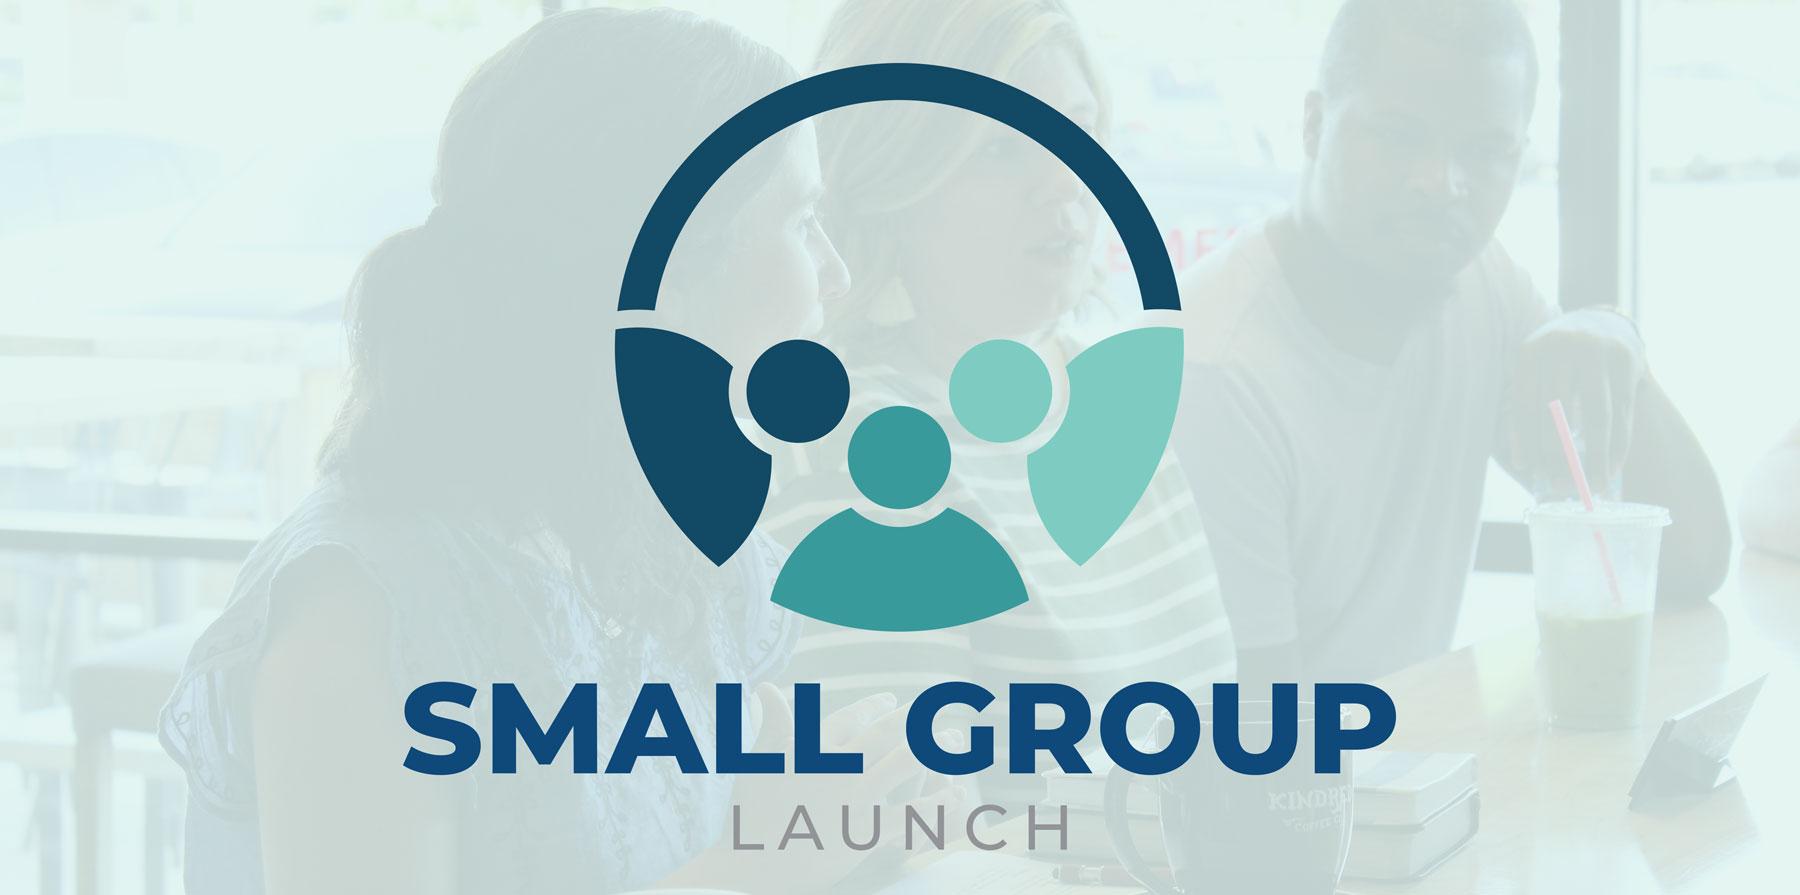 Small Group Logo - Small Group Launch - First United Methodist Church of Colleyville